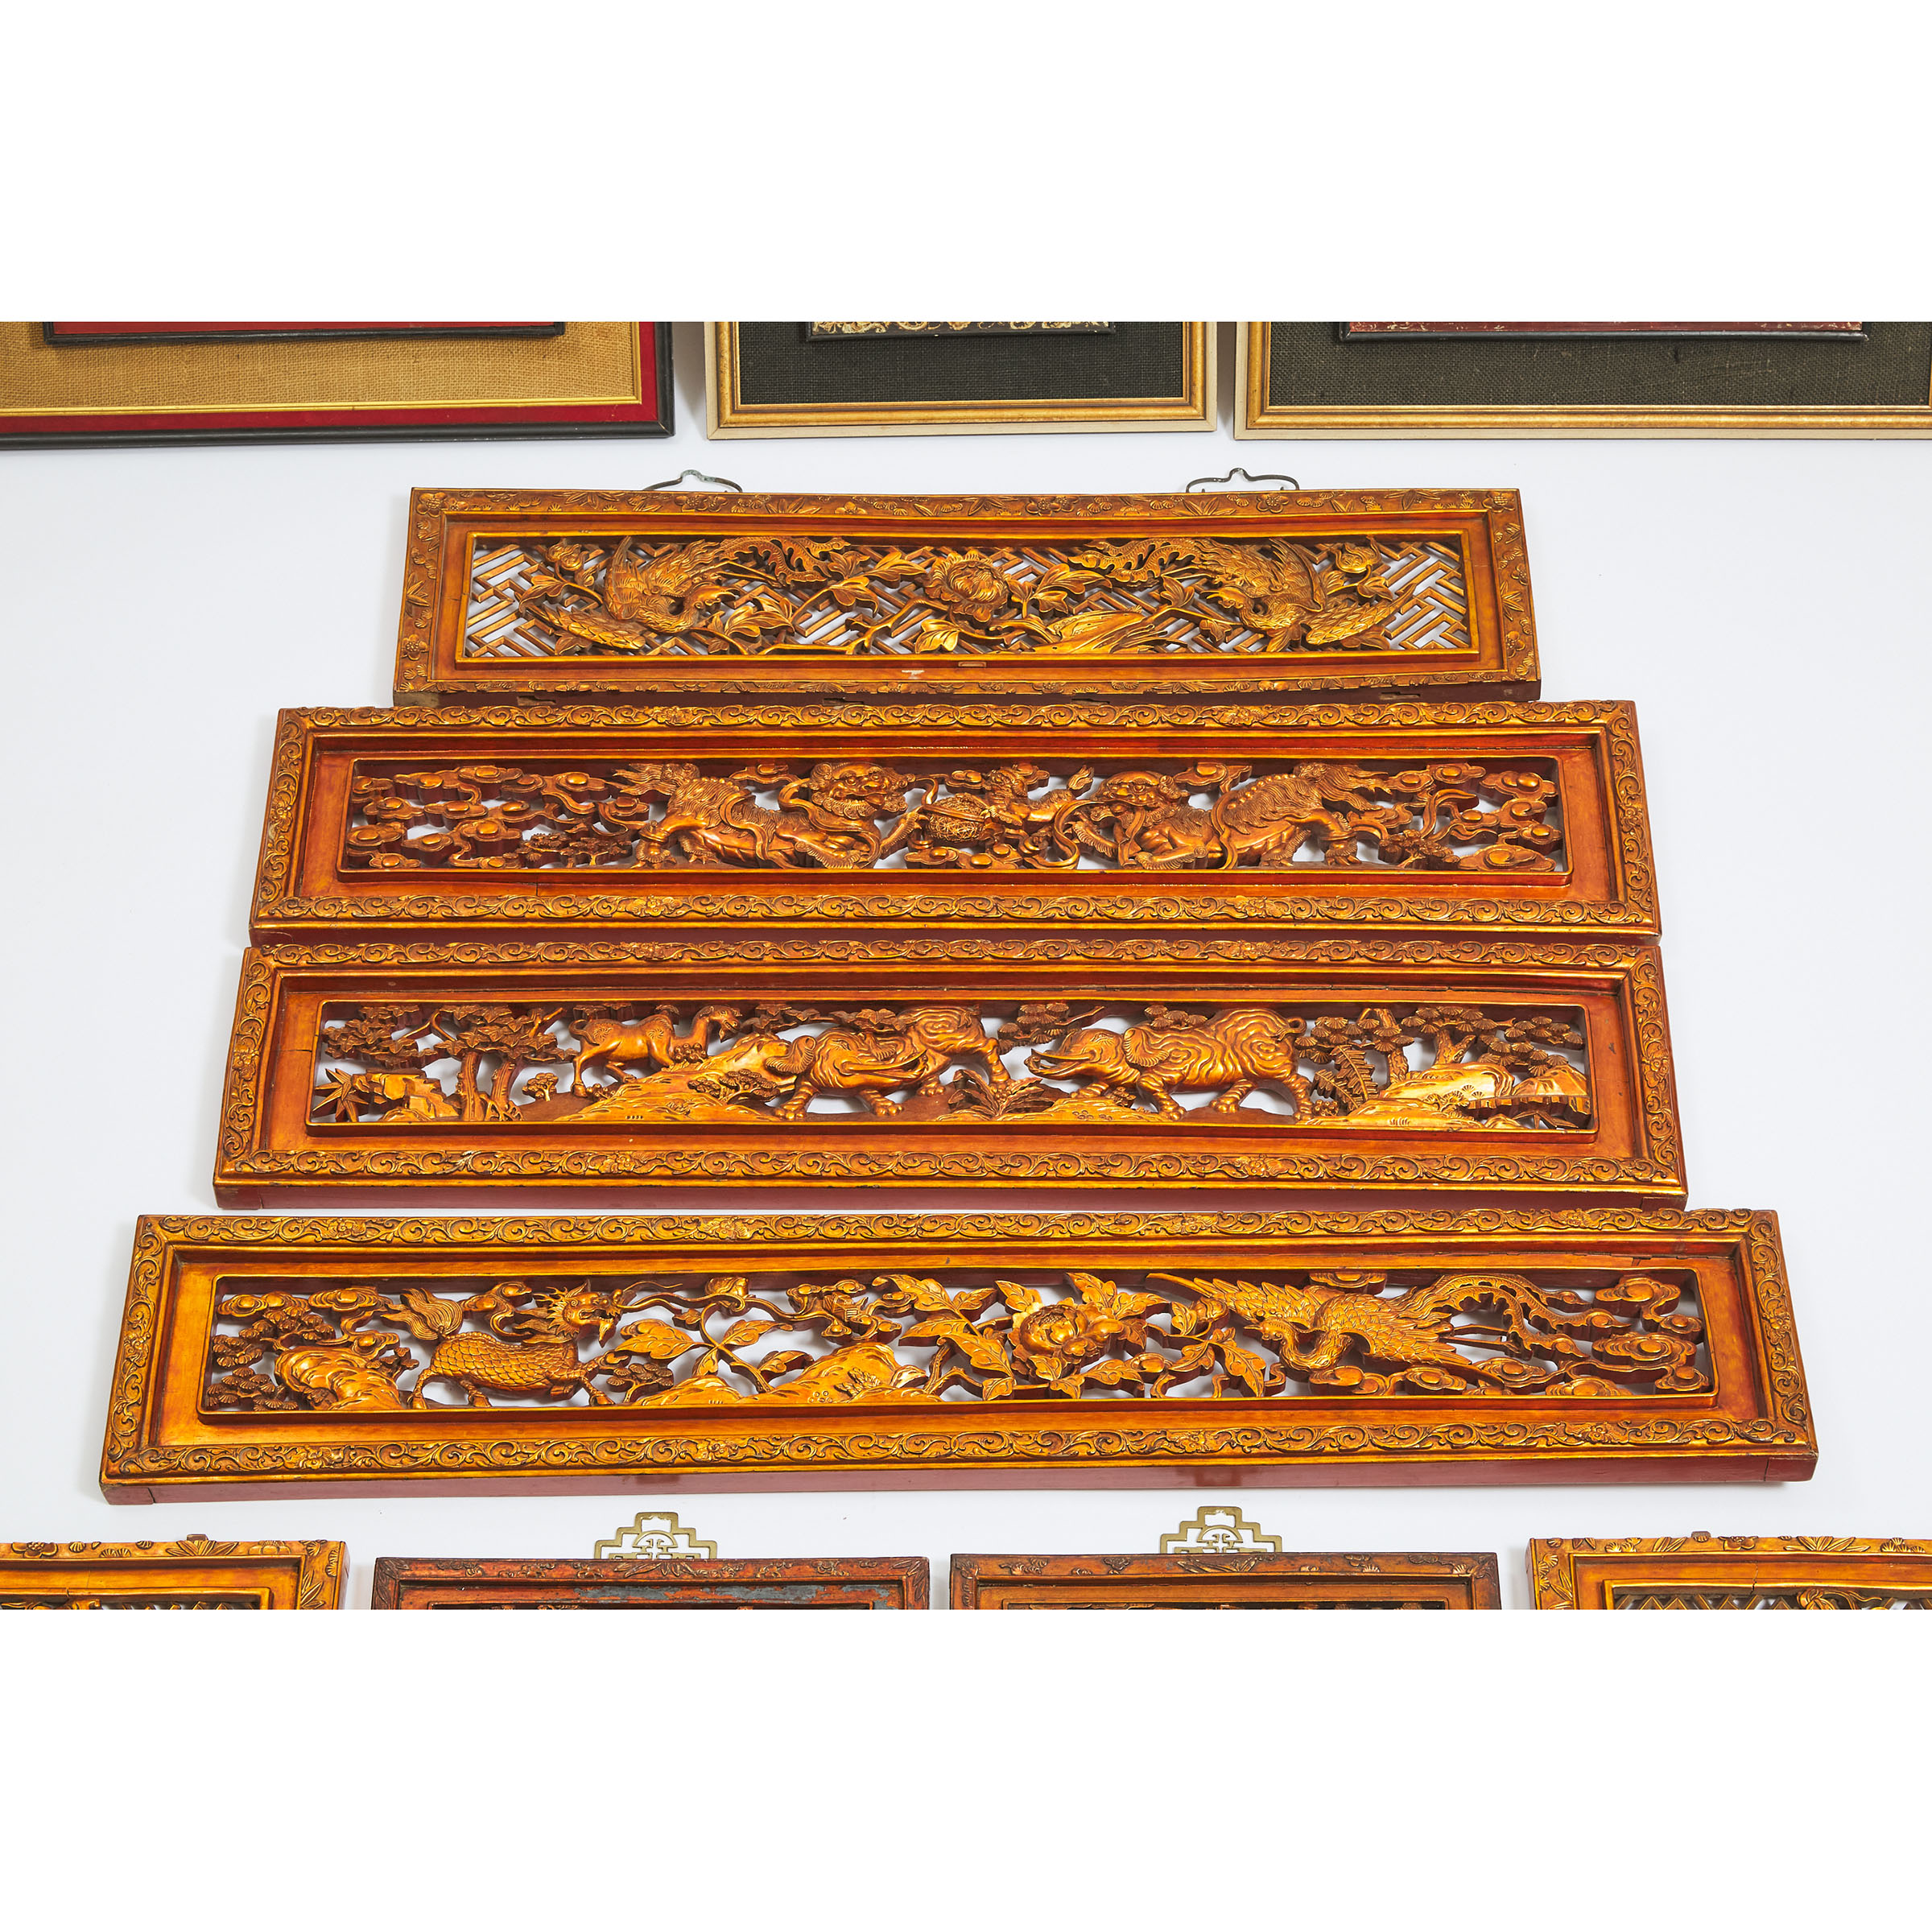 A Group of Eleven Chinese Carved Wood Panels, 19th/Early 20th Century